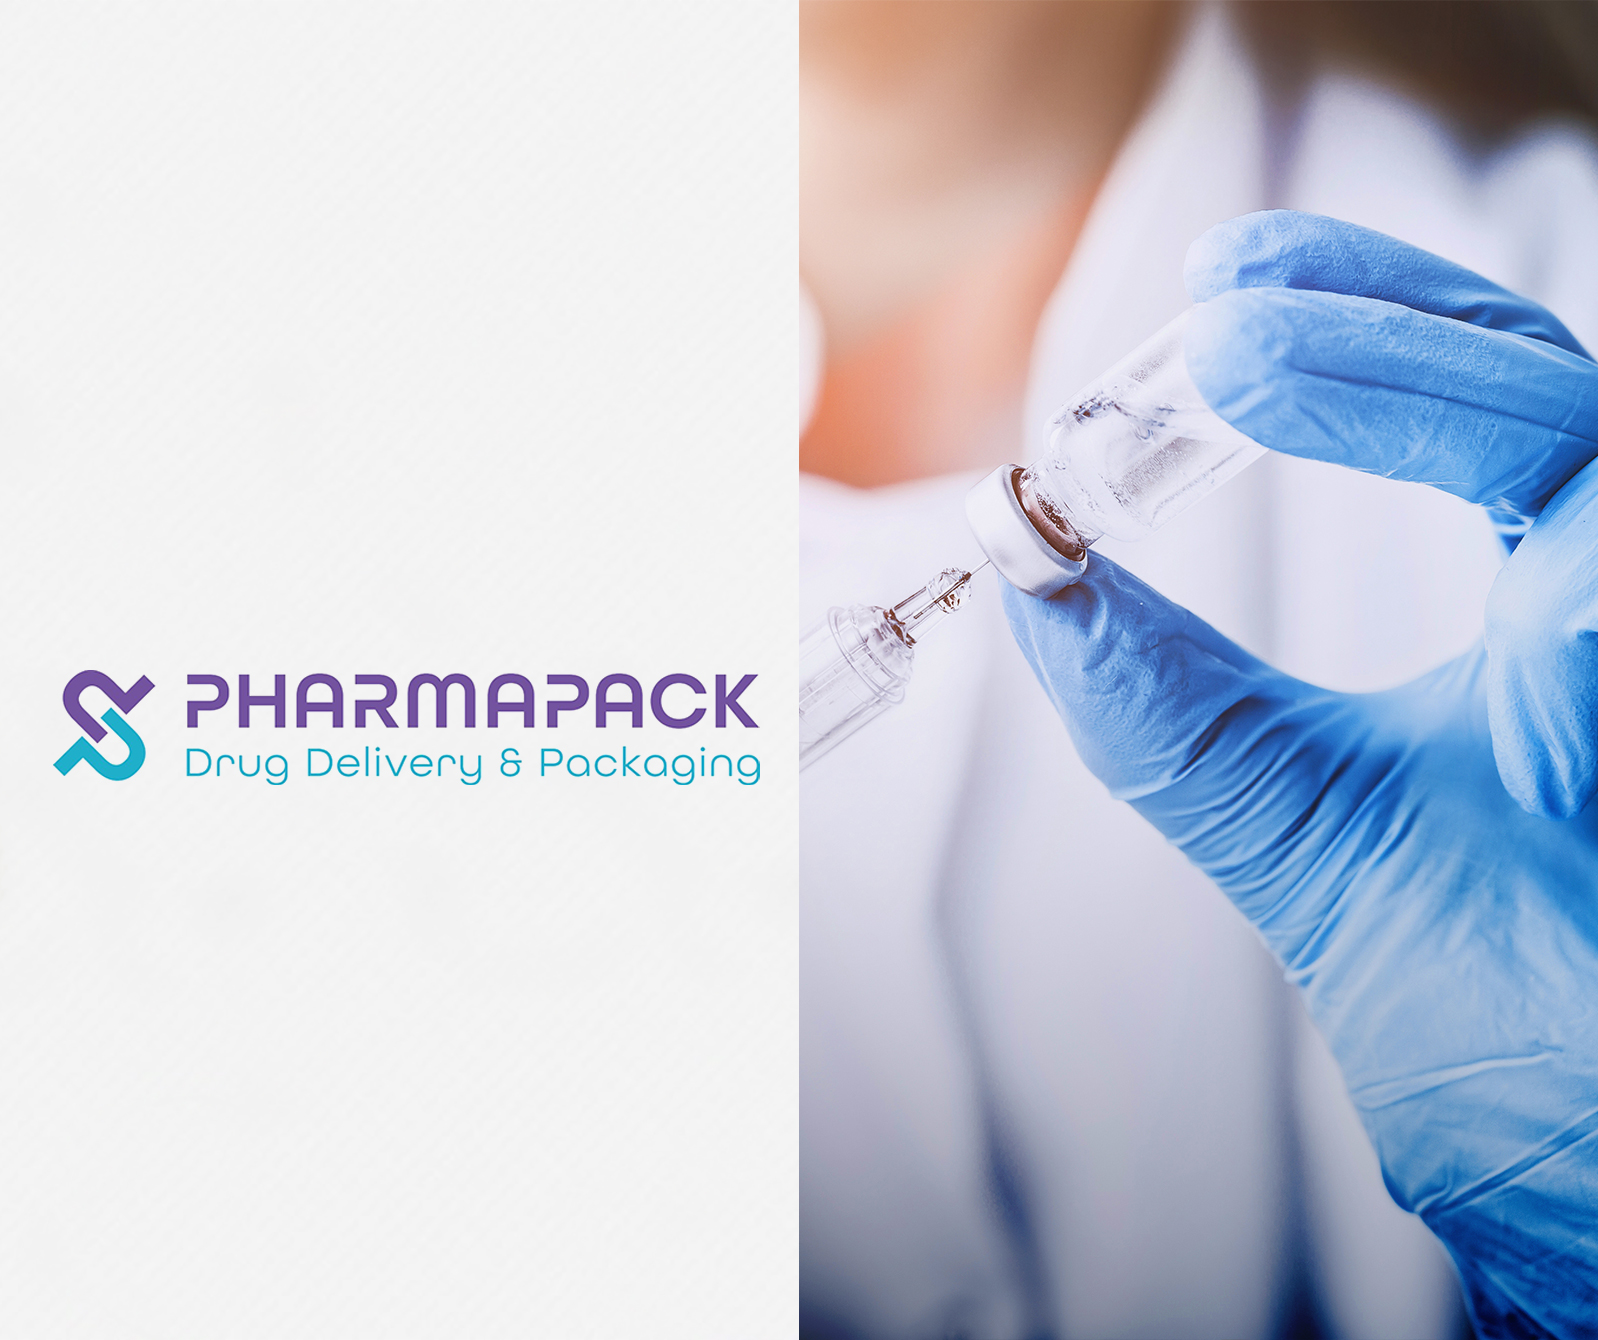 SÜDPACK MEDICA's exhibition at Pharmapack: Showcasing sustainable, PP-based solutions for blister packaging in Hall 7.2, Booth D84